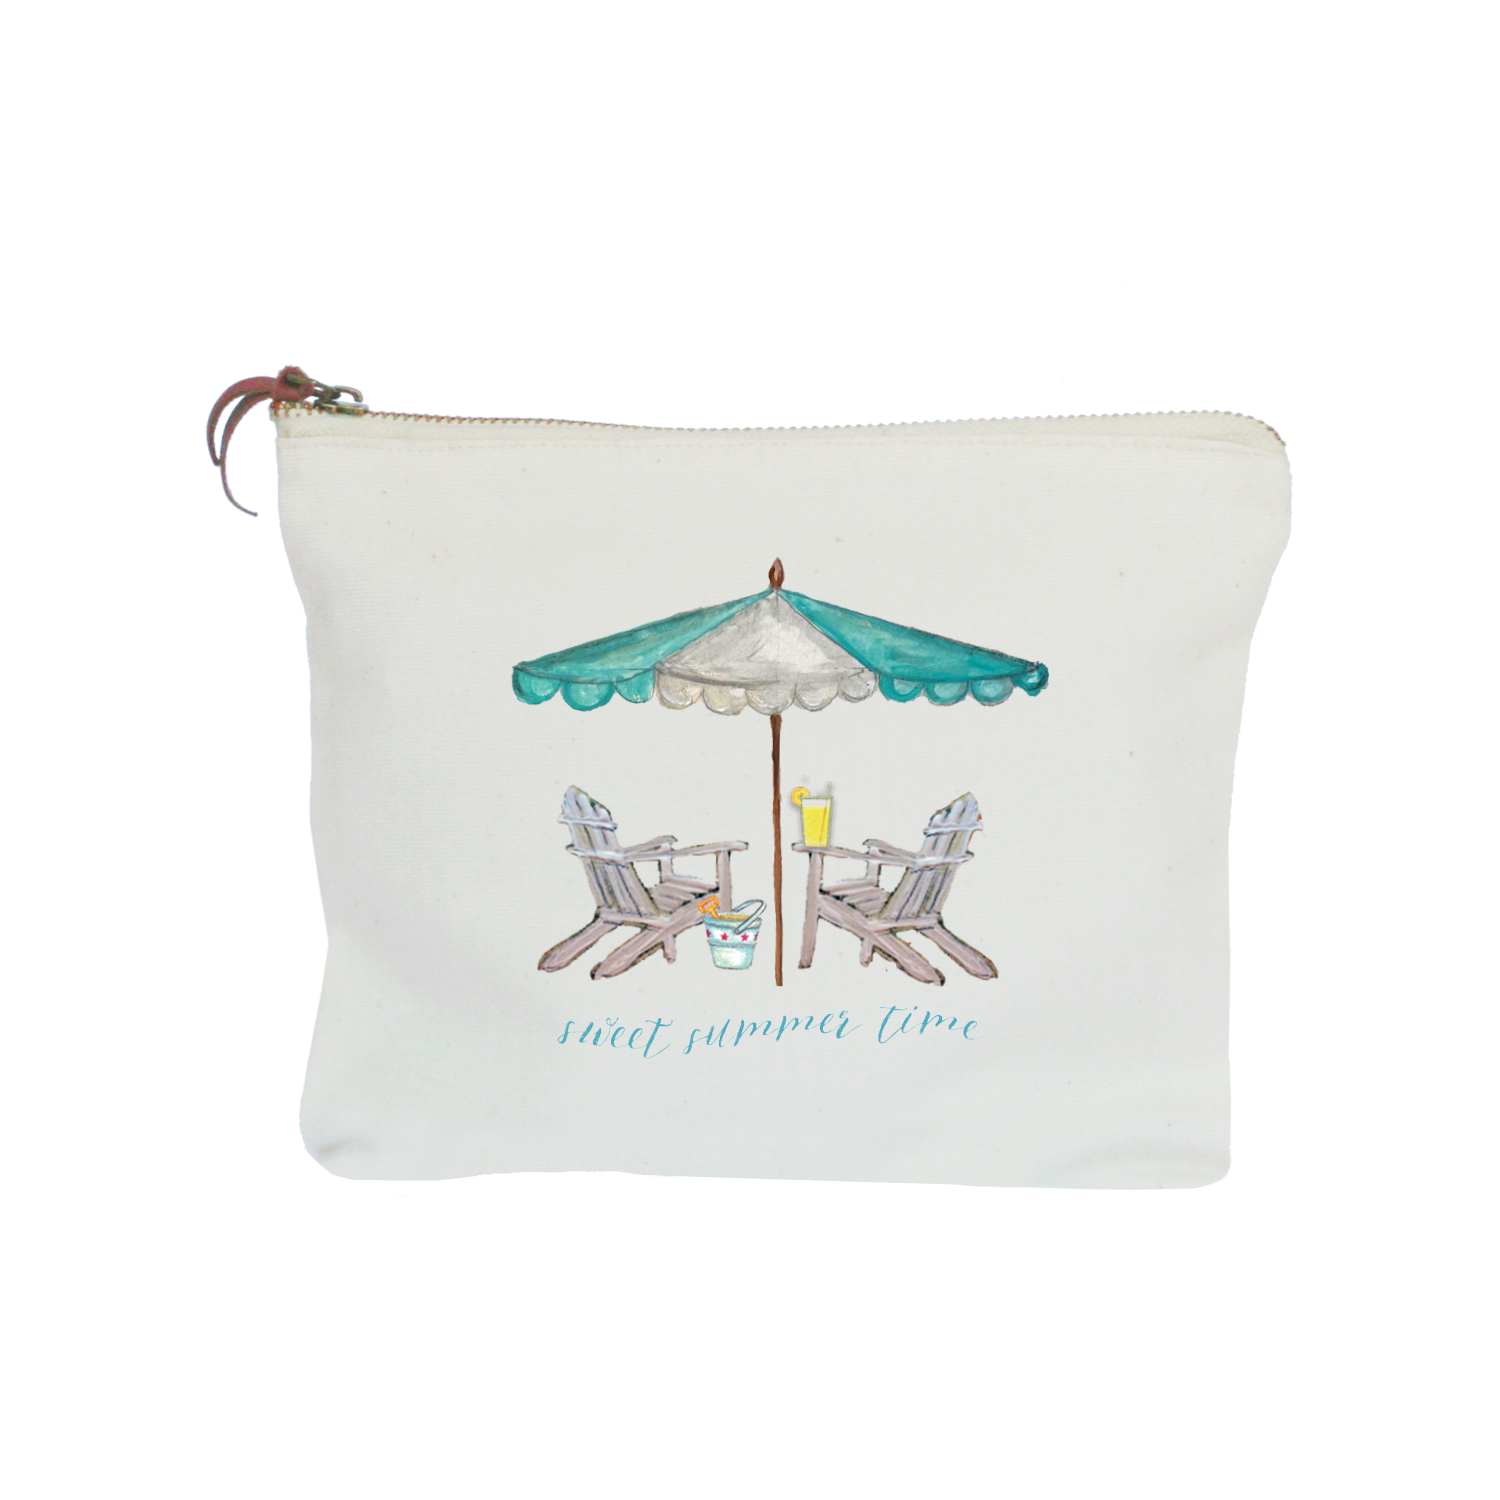 chairs with seafoam umbrella sweet summer time zipper pouch